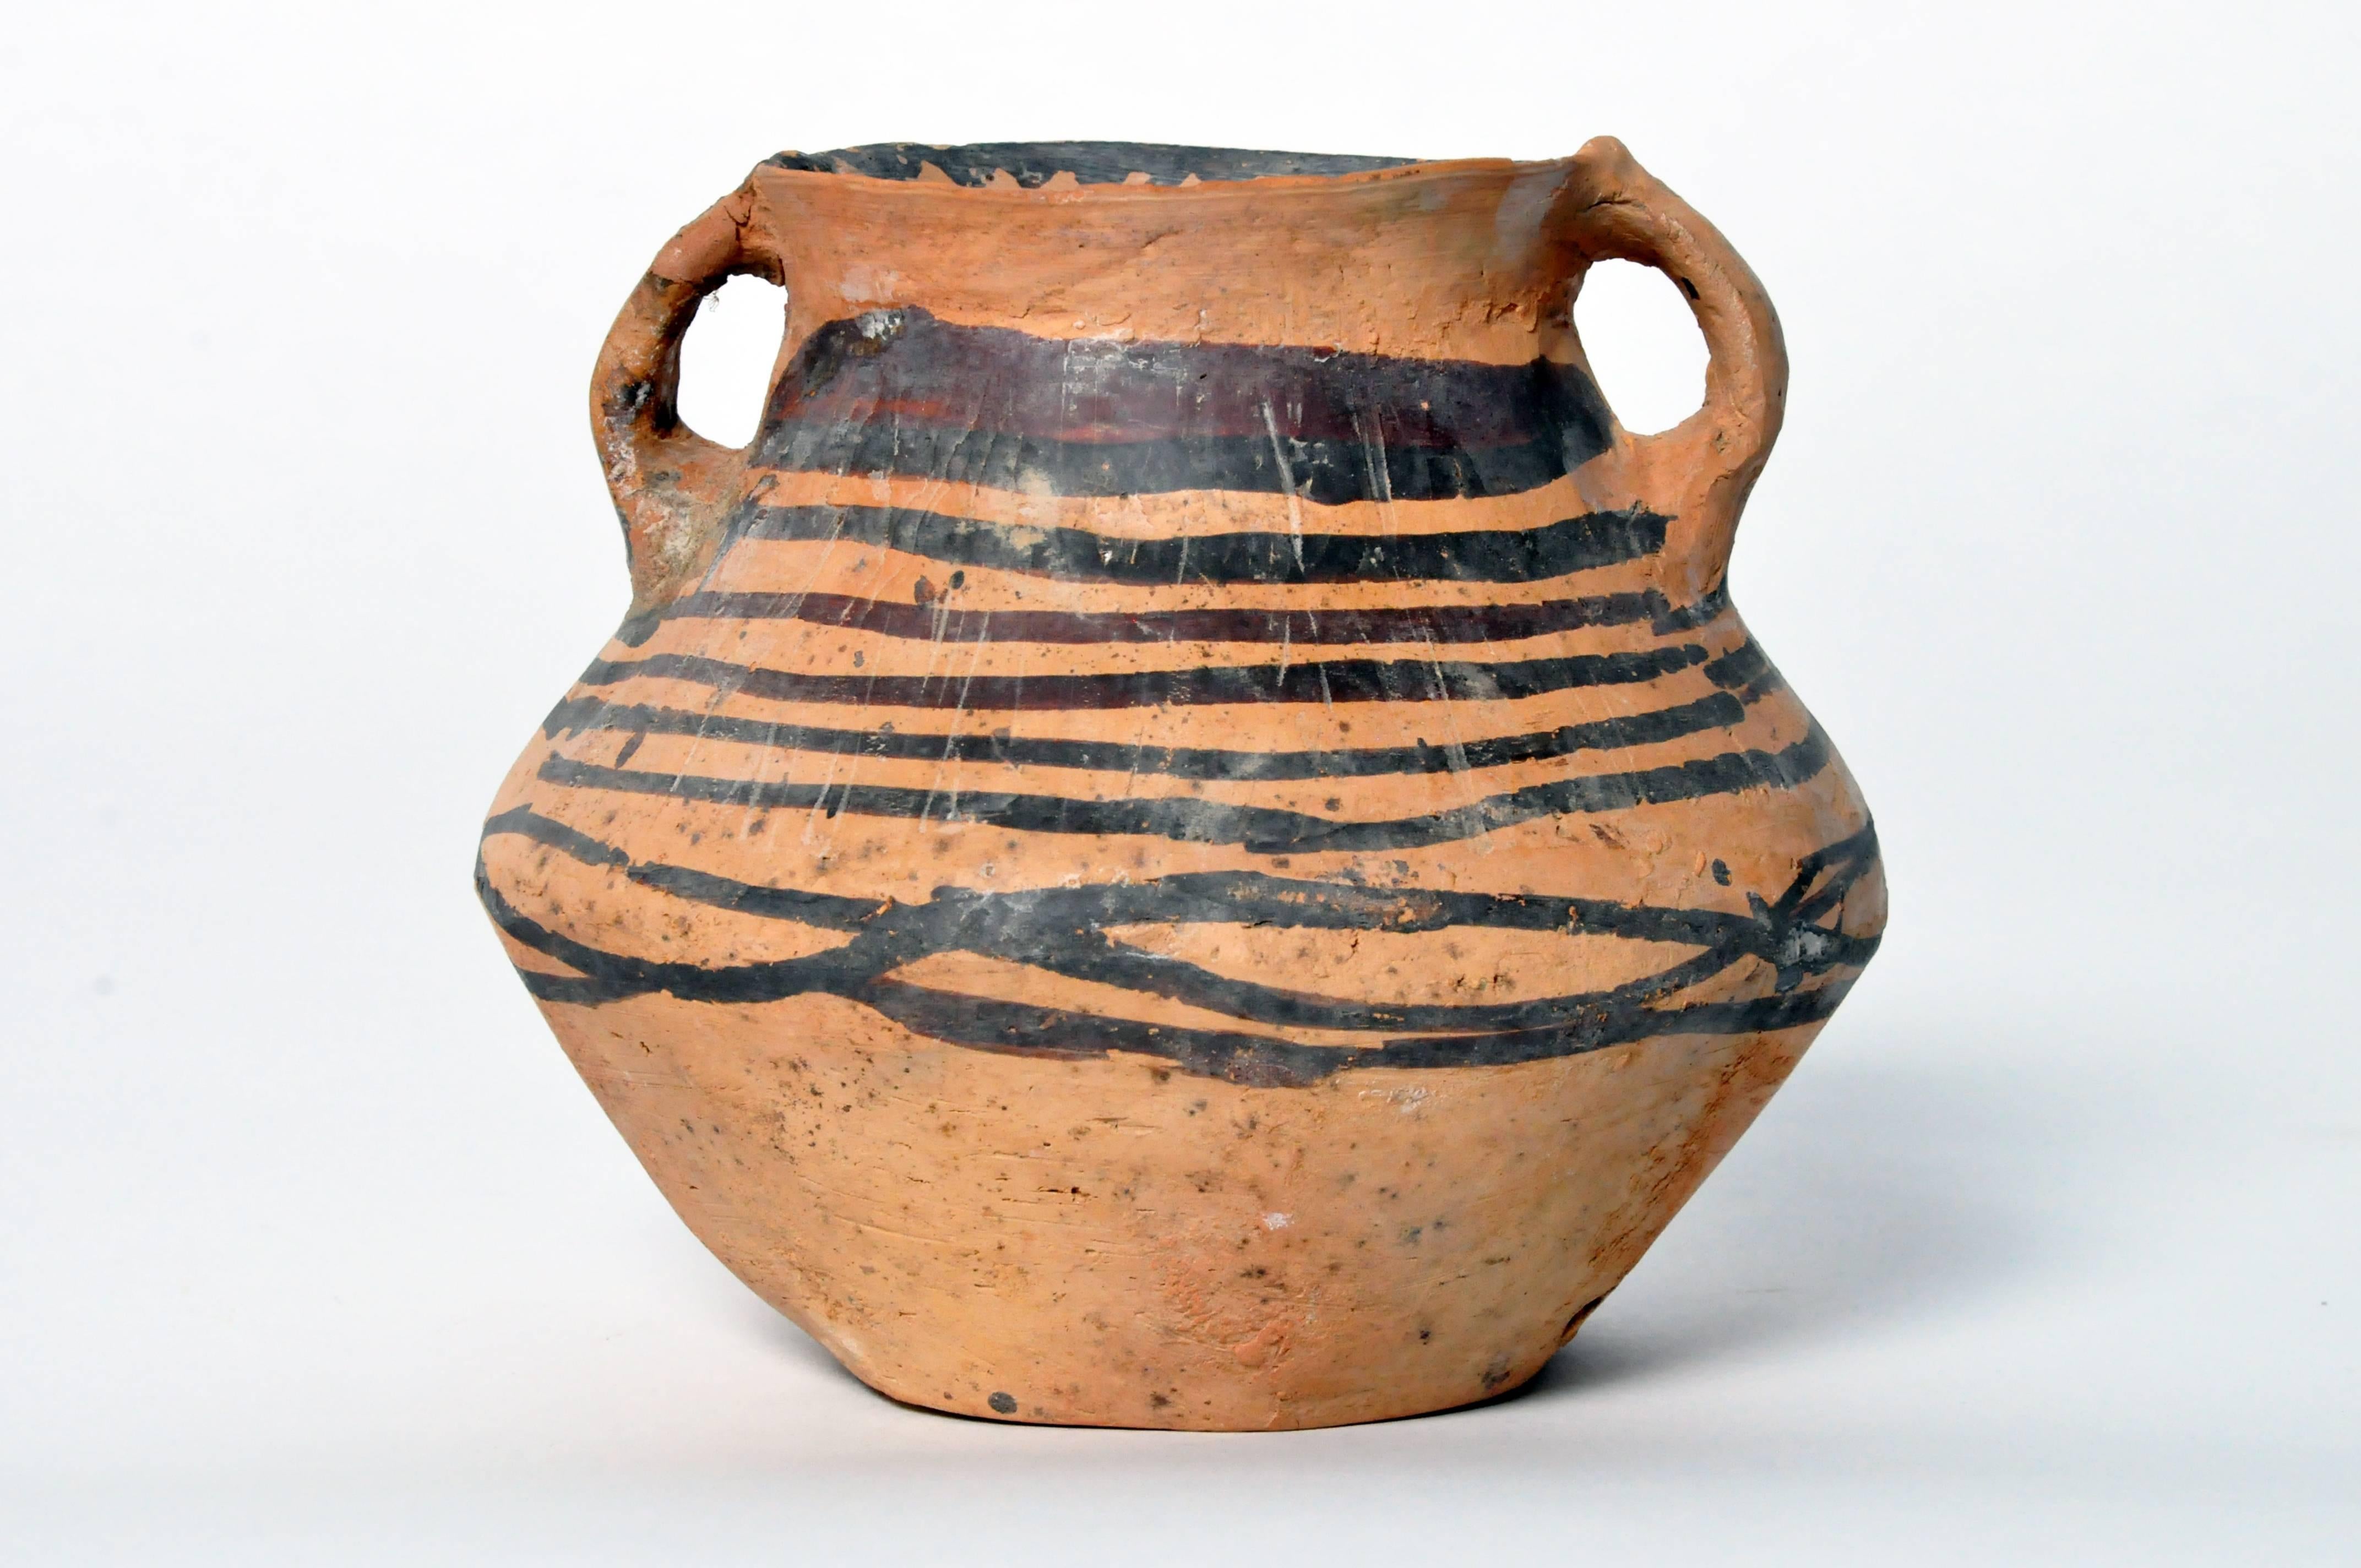 This jar was made in the Yangshao culture and is of the Machiayao type. This culture thrived in the northwestern part of China along and around the Yellow River between 3000 BC and 1700 BC The piece is in very good condition with no cracks to the